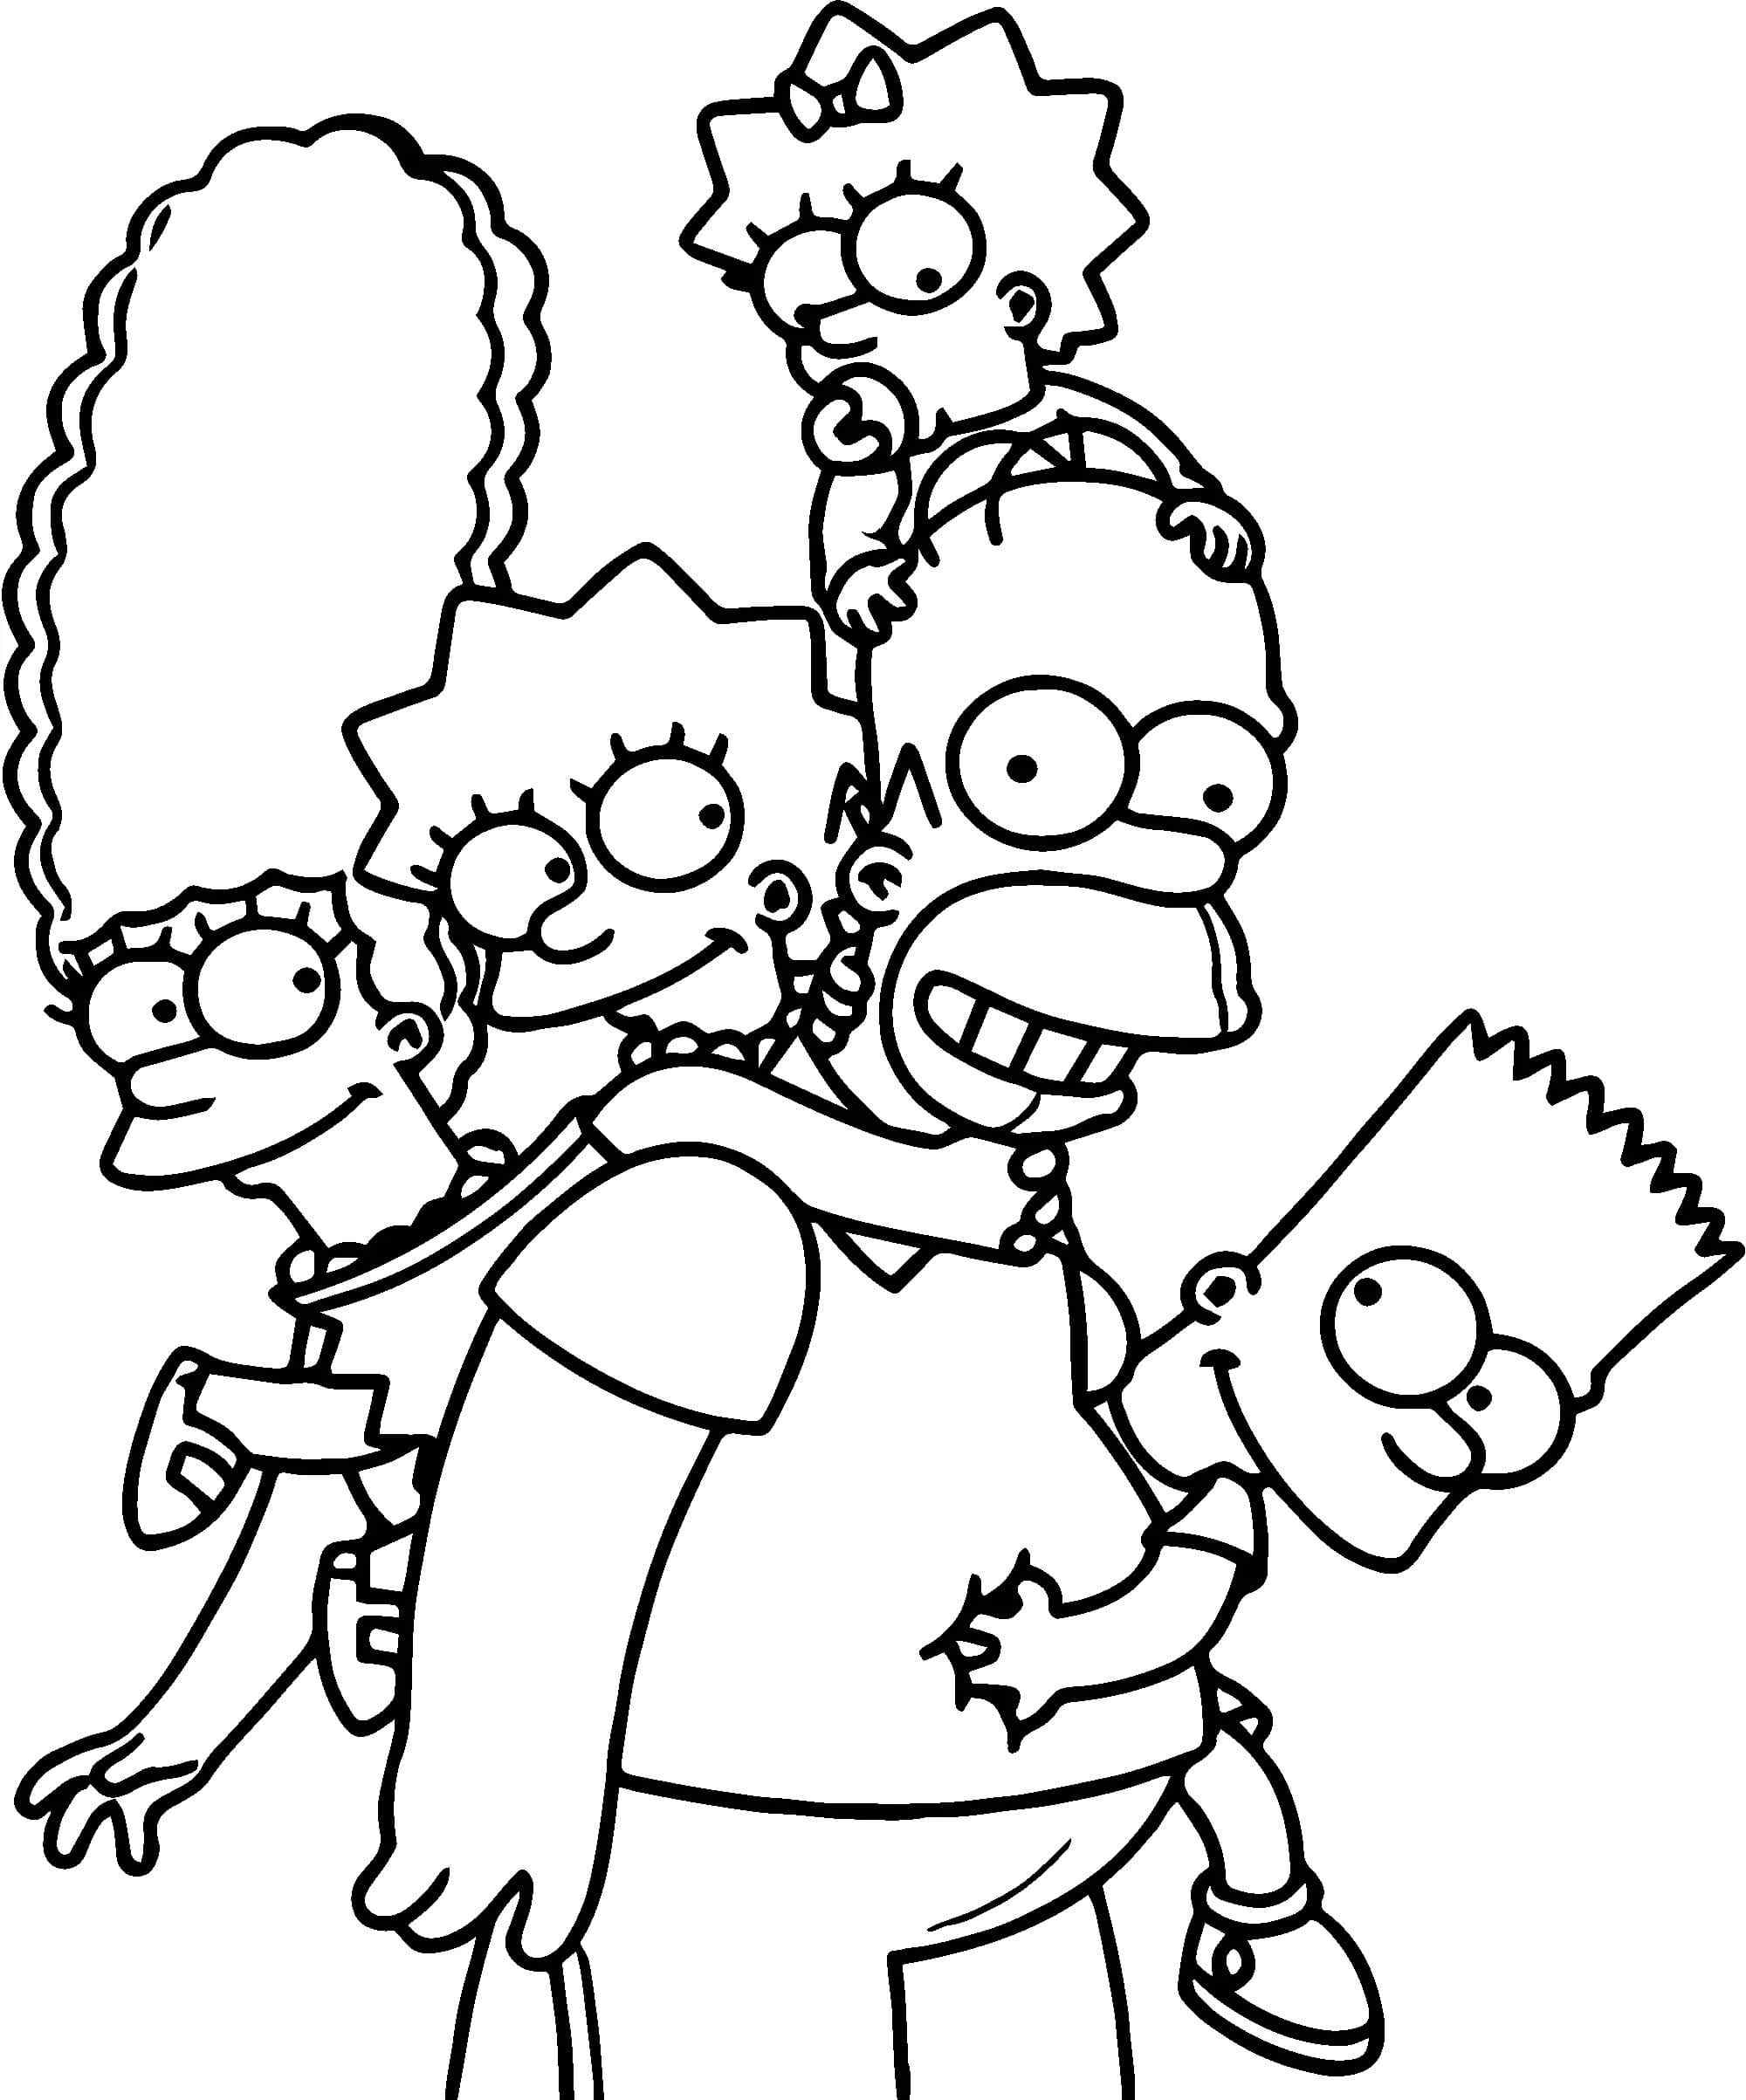 A Friendly Family Led By Homer Simpsons Coloring Page